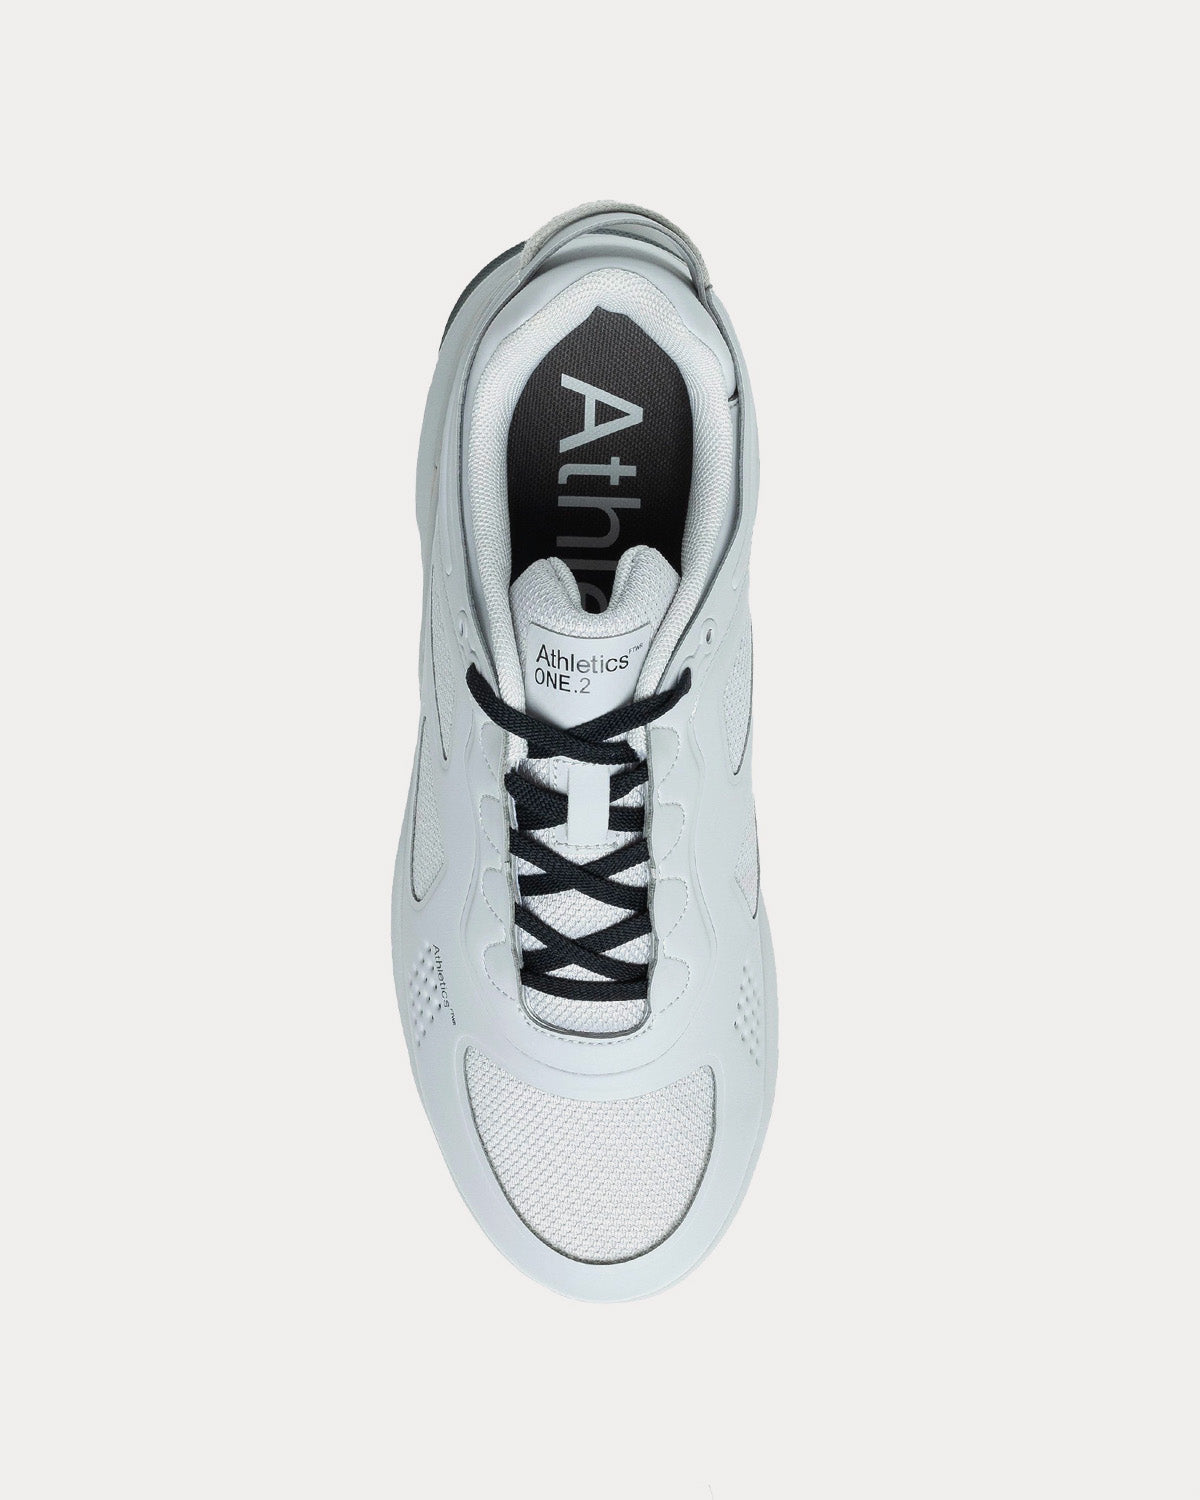 Athletics FTWR - One.2 Clay Low Top Sneakers